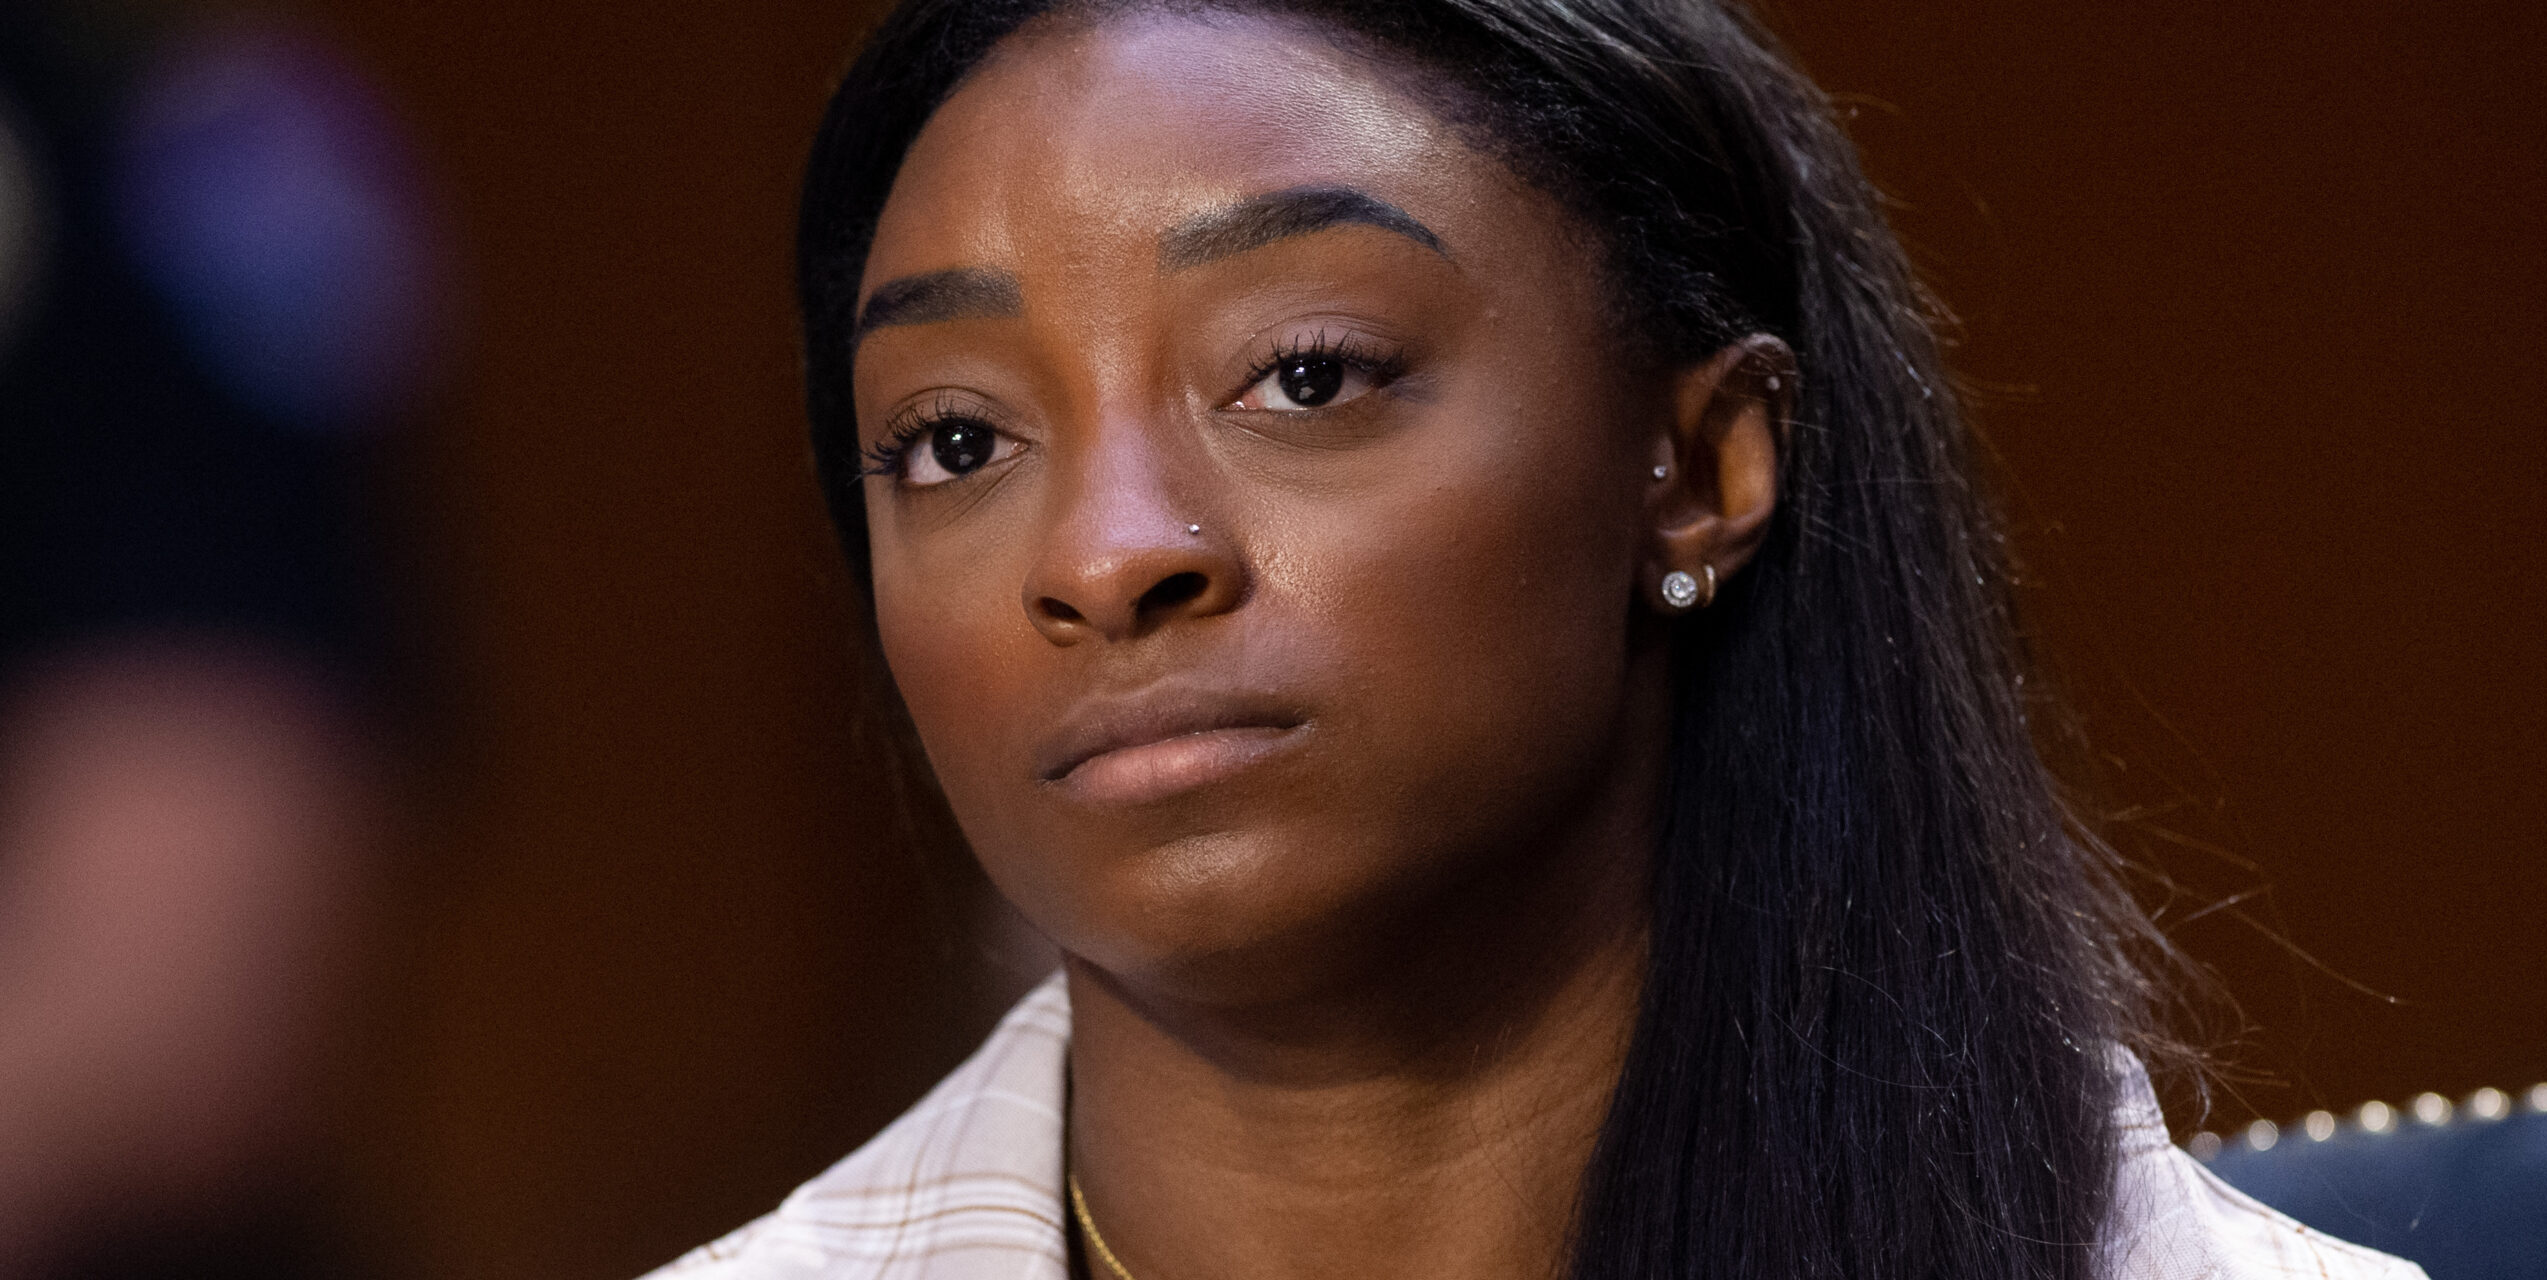 Simone Biles, Fellow U.S. Gymnasts Sue FBI For Over $1 Billion For Neglect Following Sexual Assault Allegations